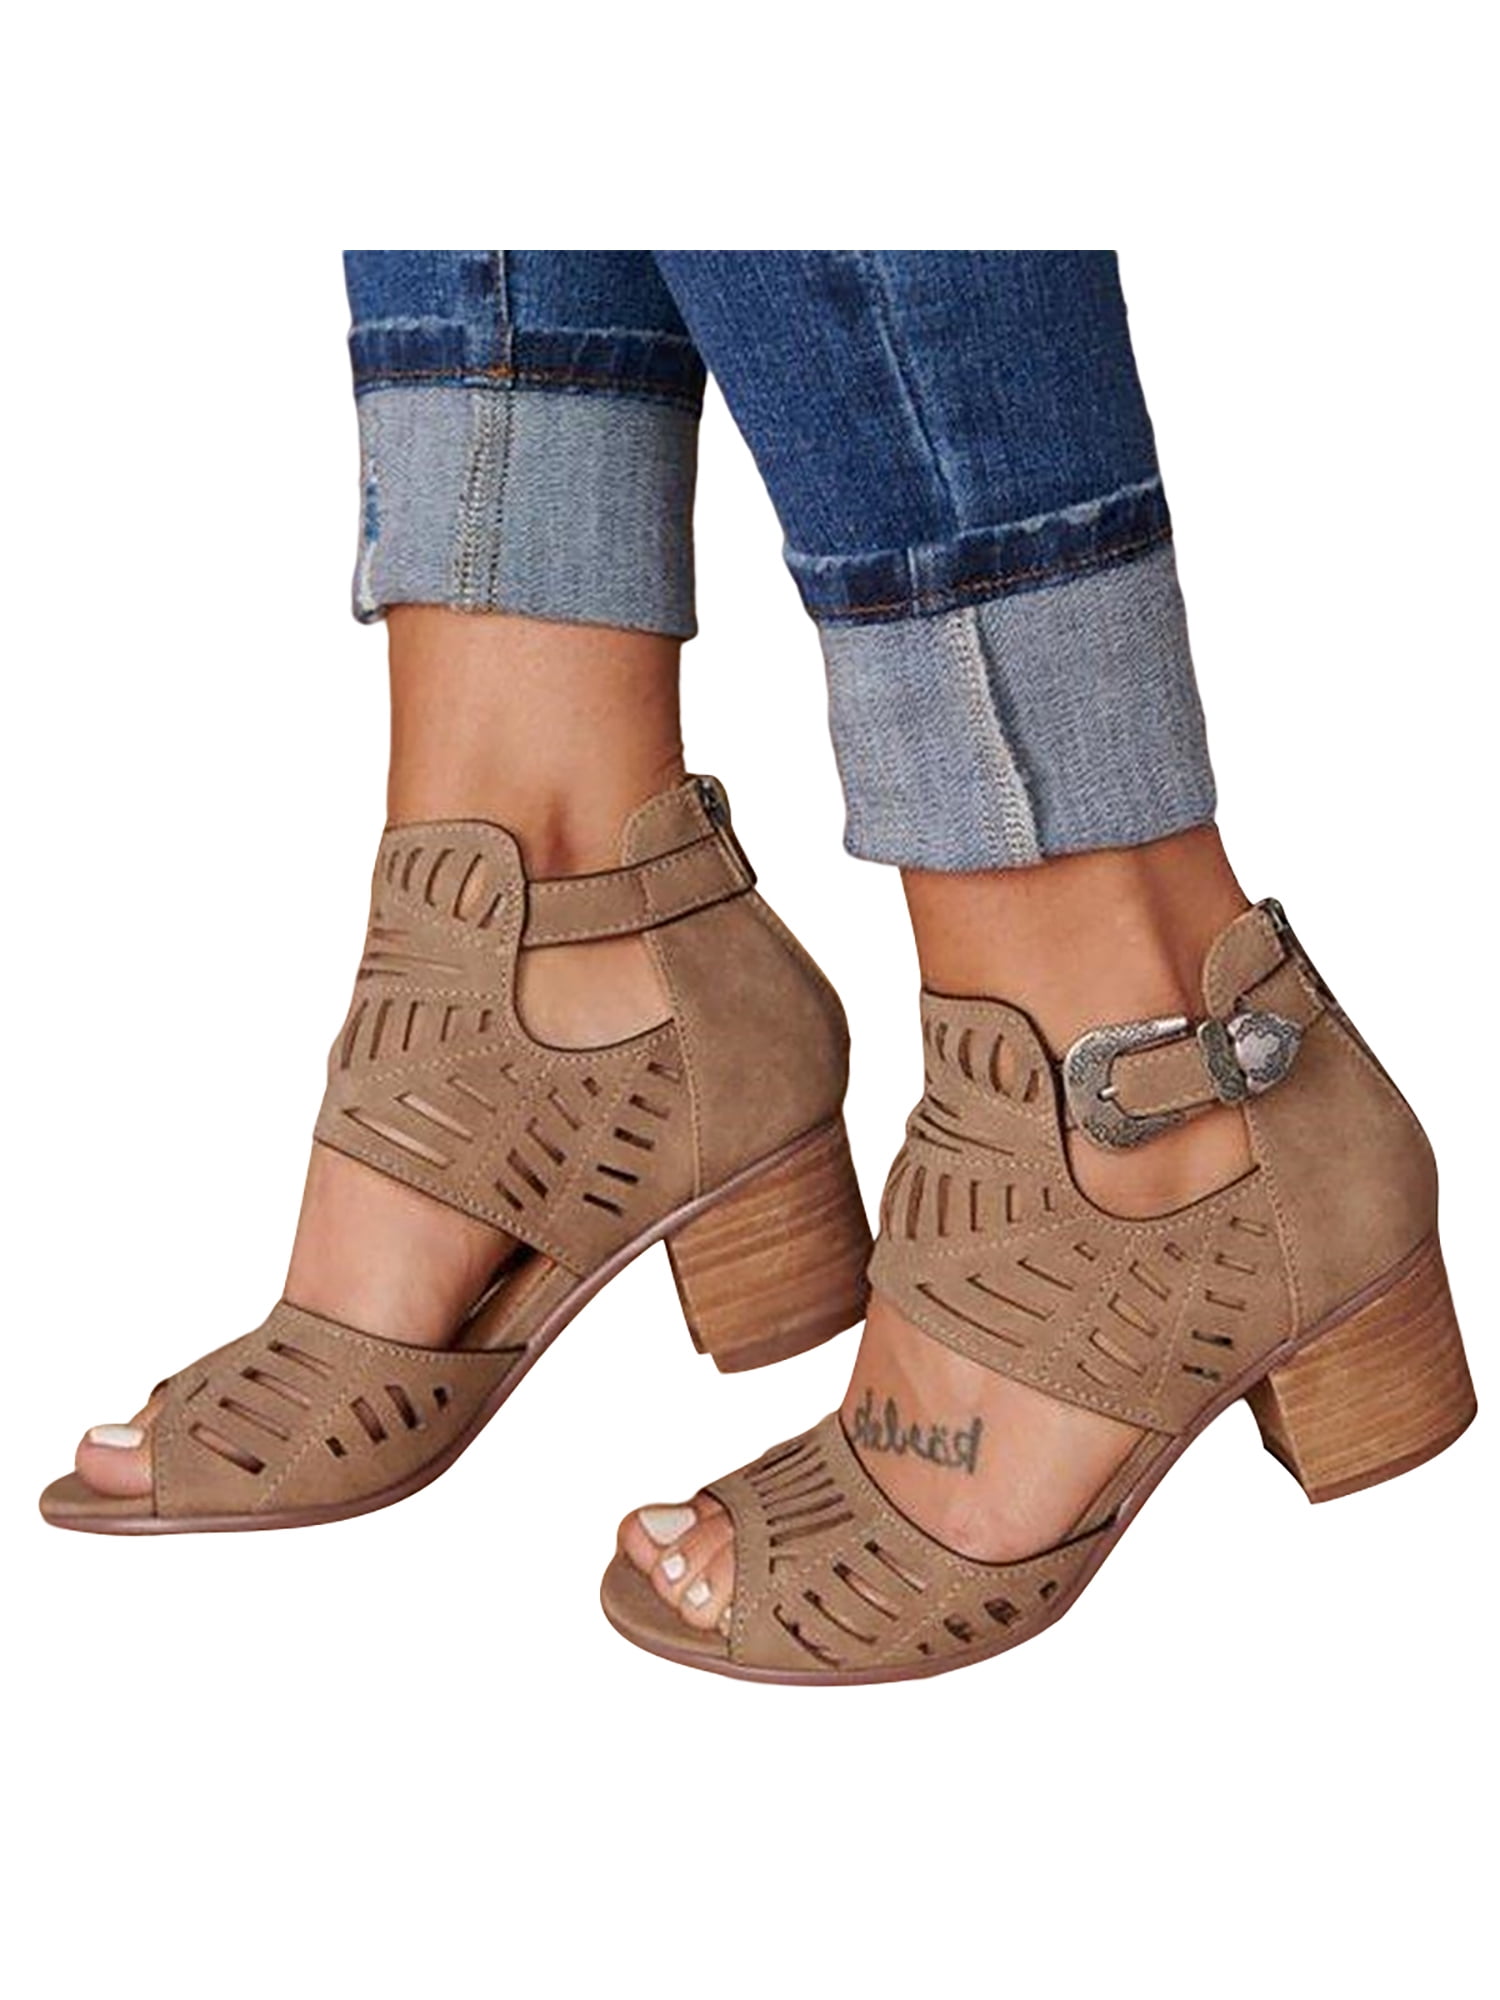 NEW LADIES LOW MID BLOCK HEEL PEEP TOE LACE UP CAGED GLADIATOR SHOES SIZE ANKLE 